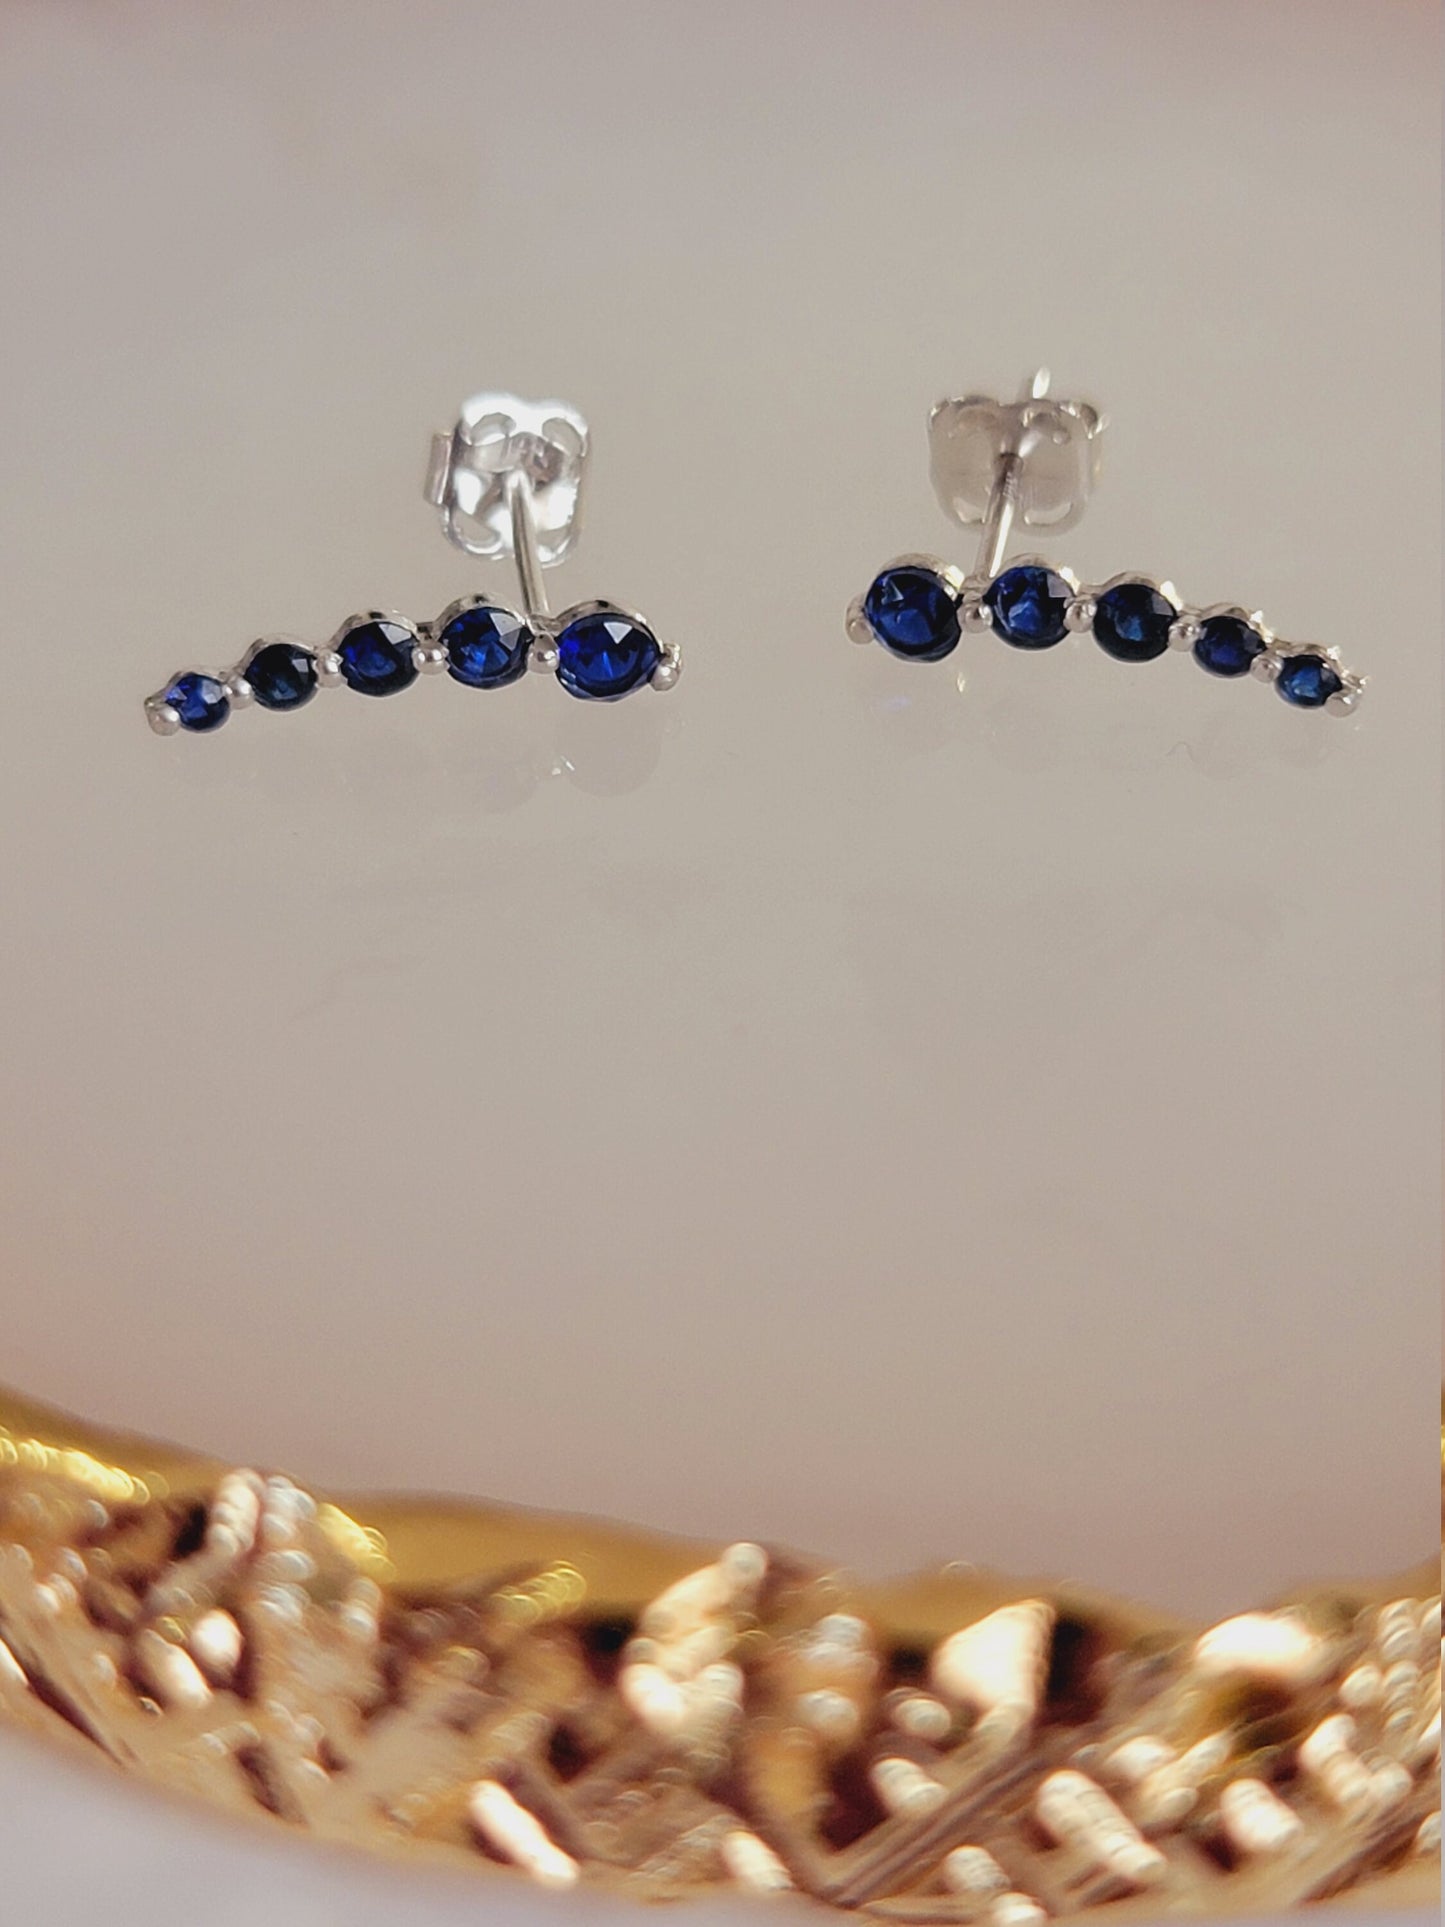 Curved Blue Sapphire Earrings, 14k Gold Studs, Blue Sapphire Studs, Ear Climber Earrings, Dainty Earrings, Minimalist Earrings, Curved Studs